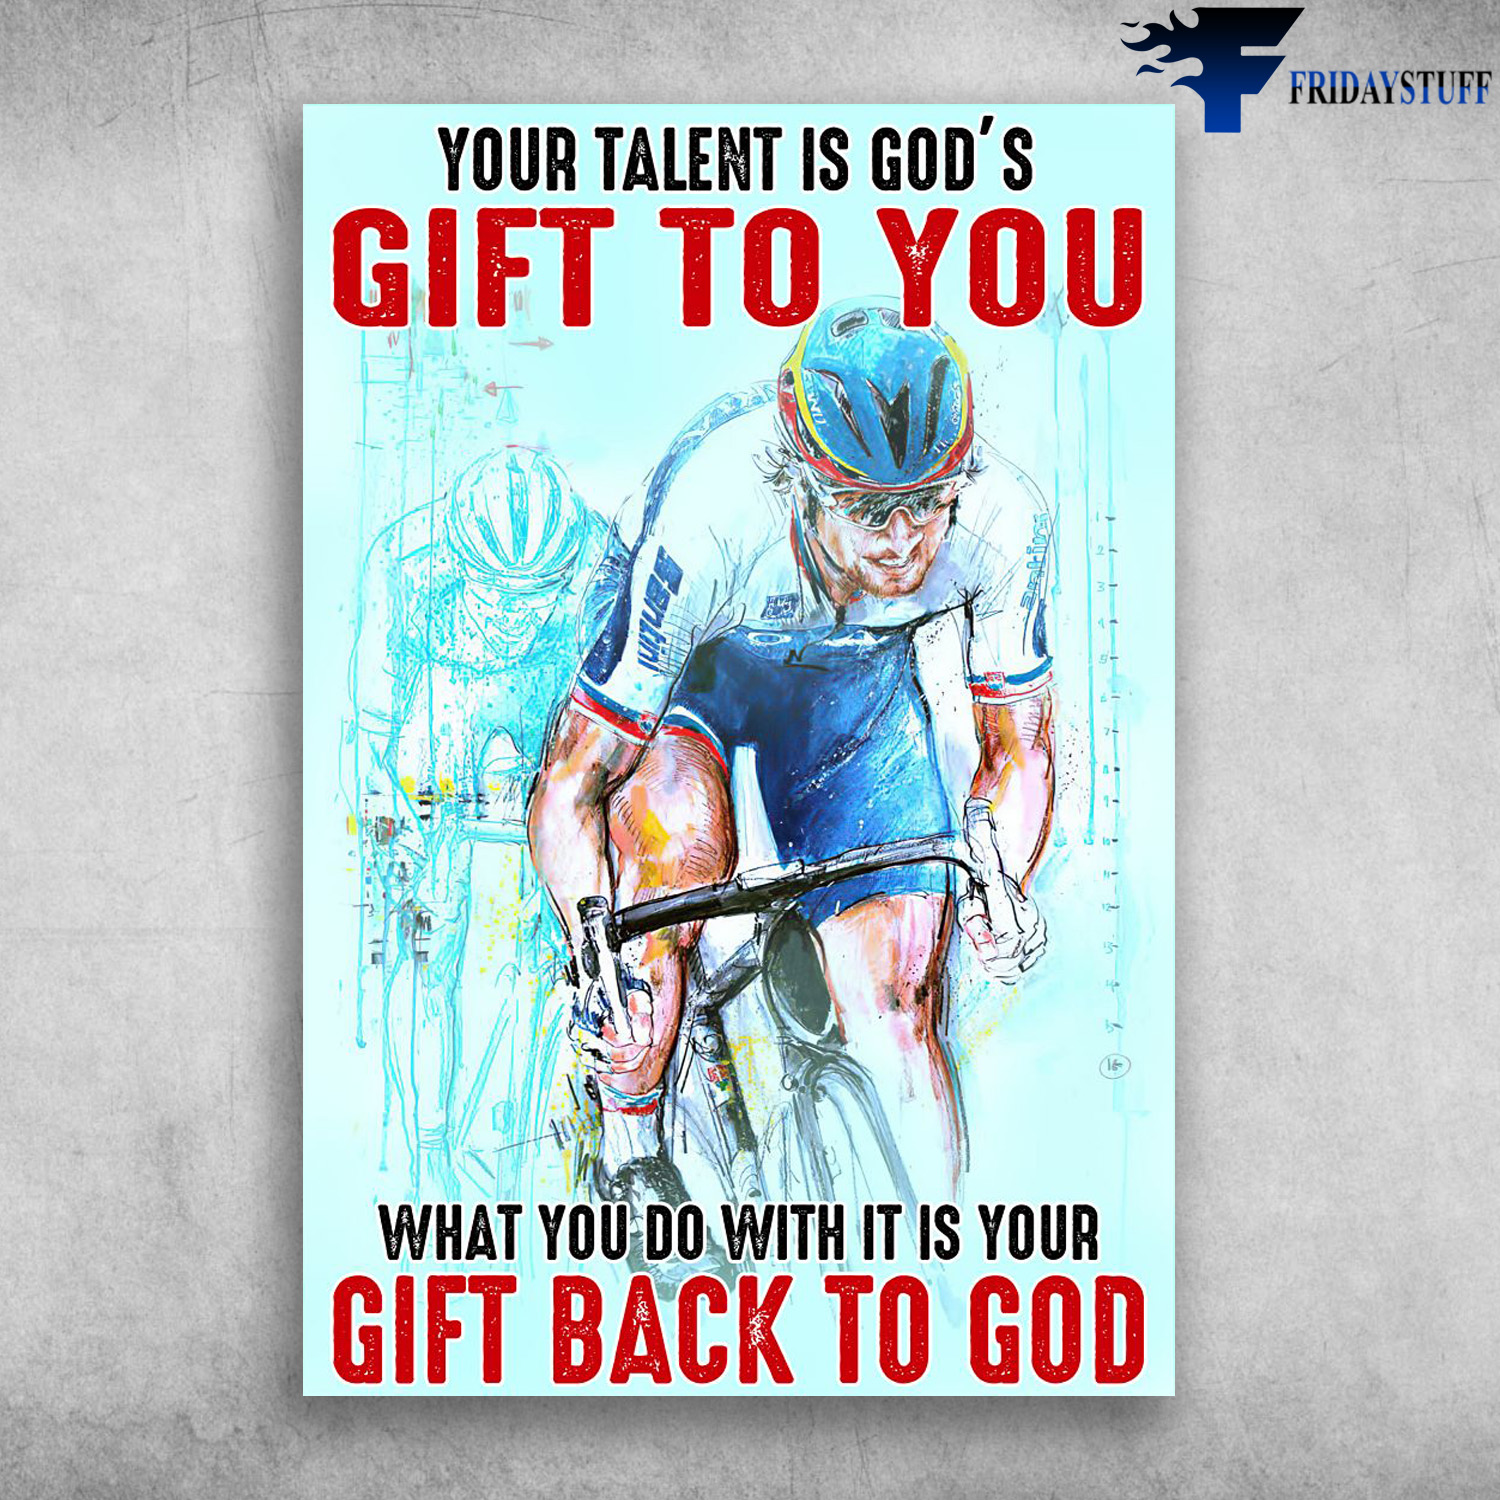 Man Cycling - Your Talent Is God's Gift To You, What You Do With It Is Your Gift Back To God